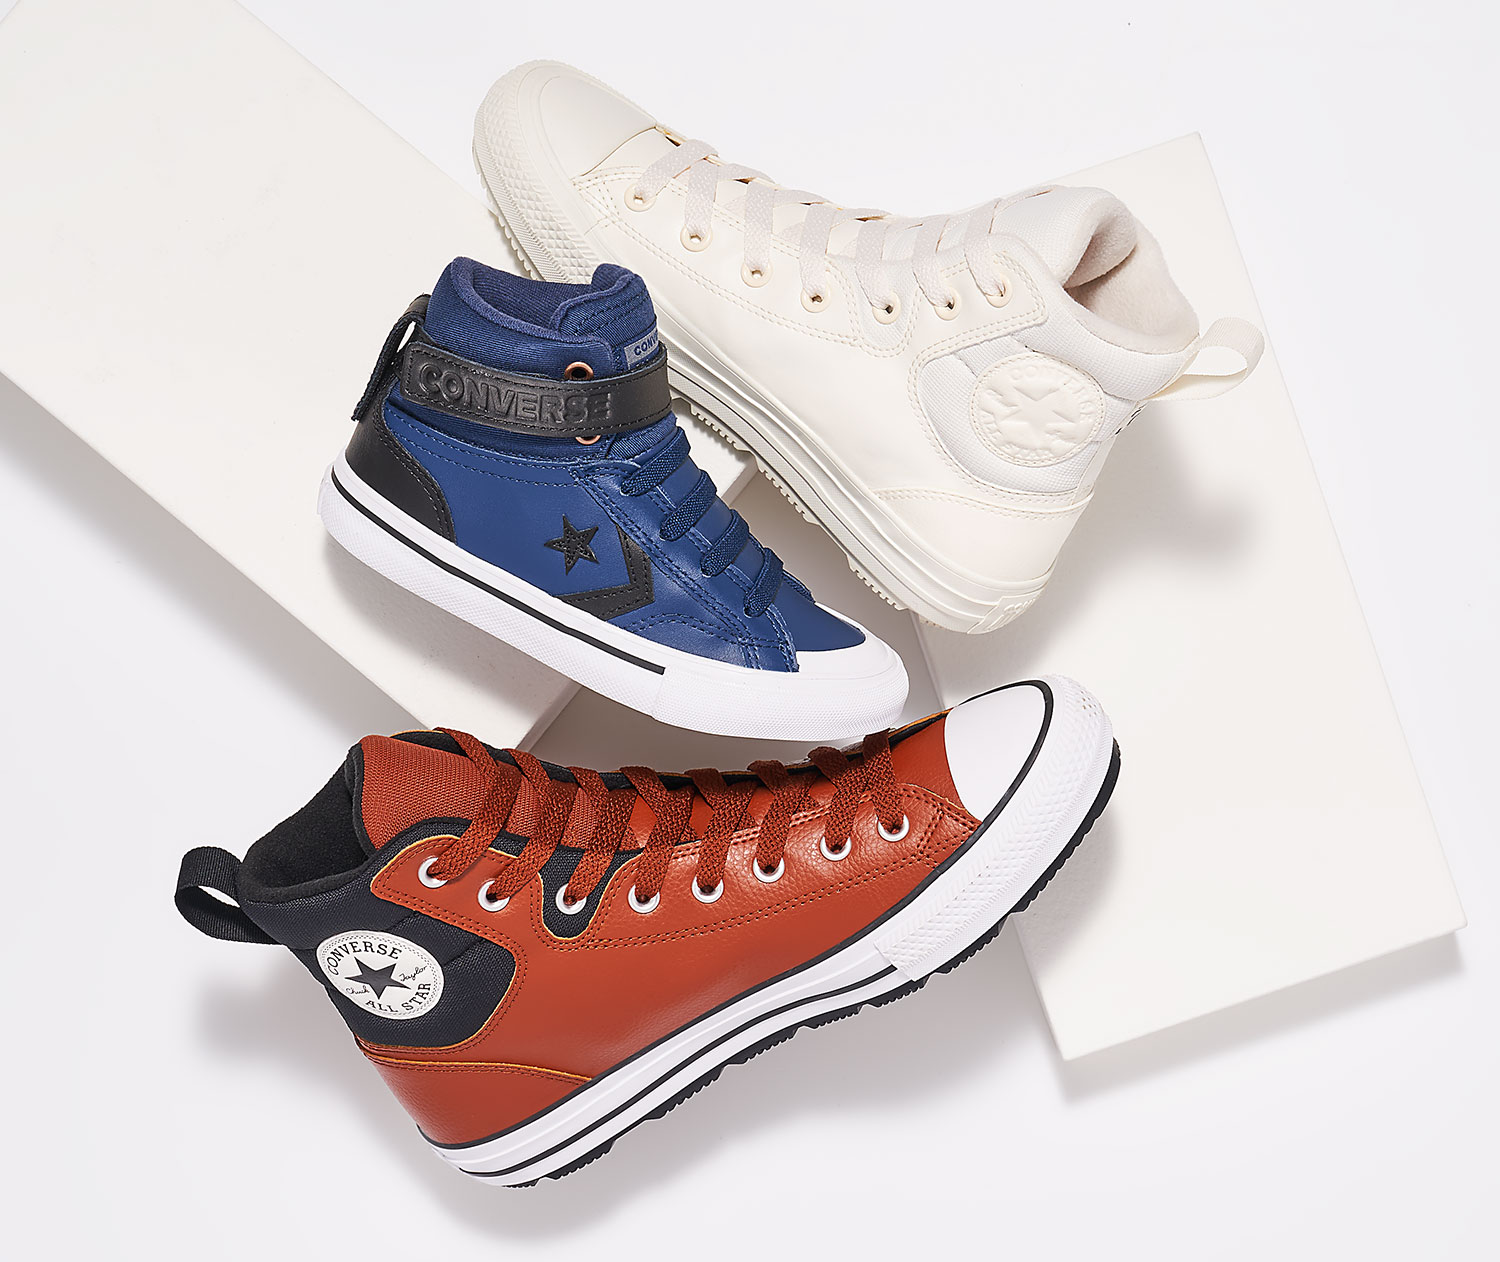 best place to buy converse shoes online